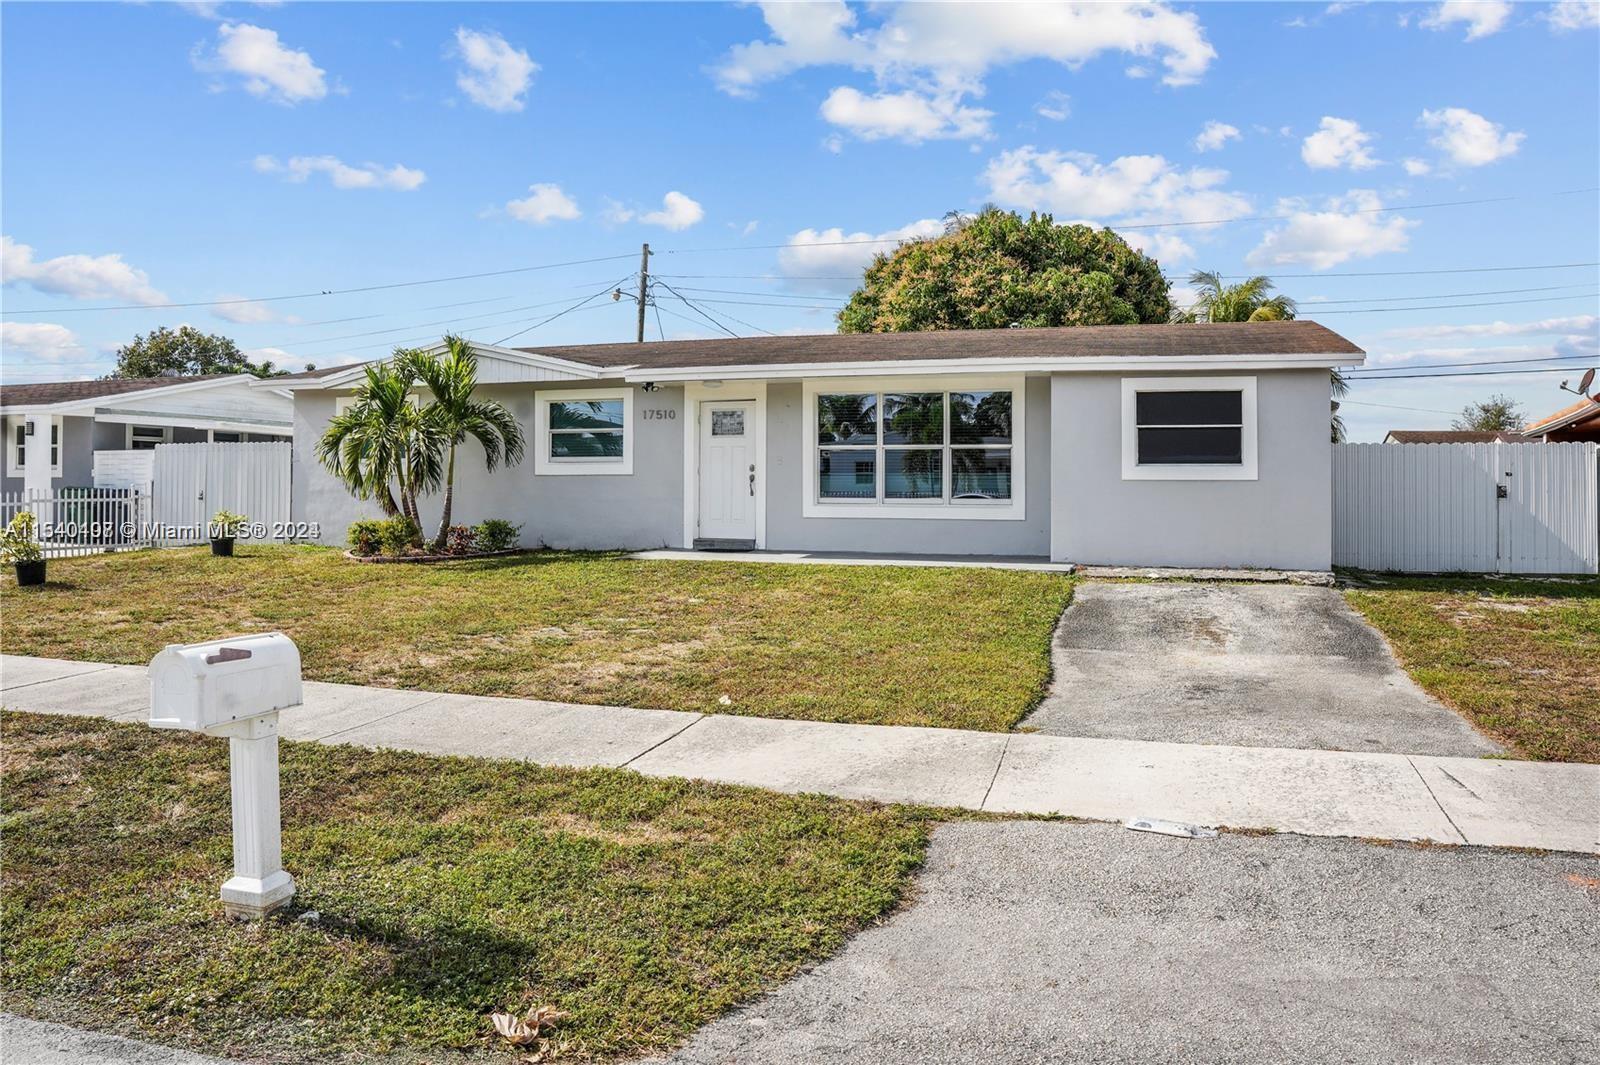 Photo of 17510 NW 49th Ave in Miami Gardens, FL